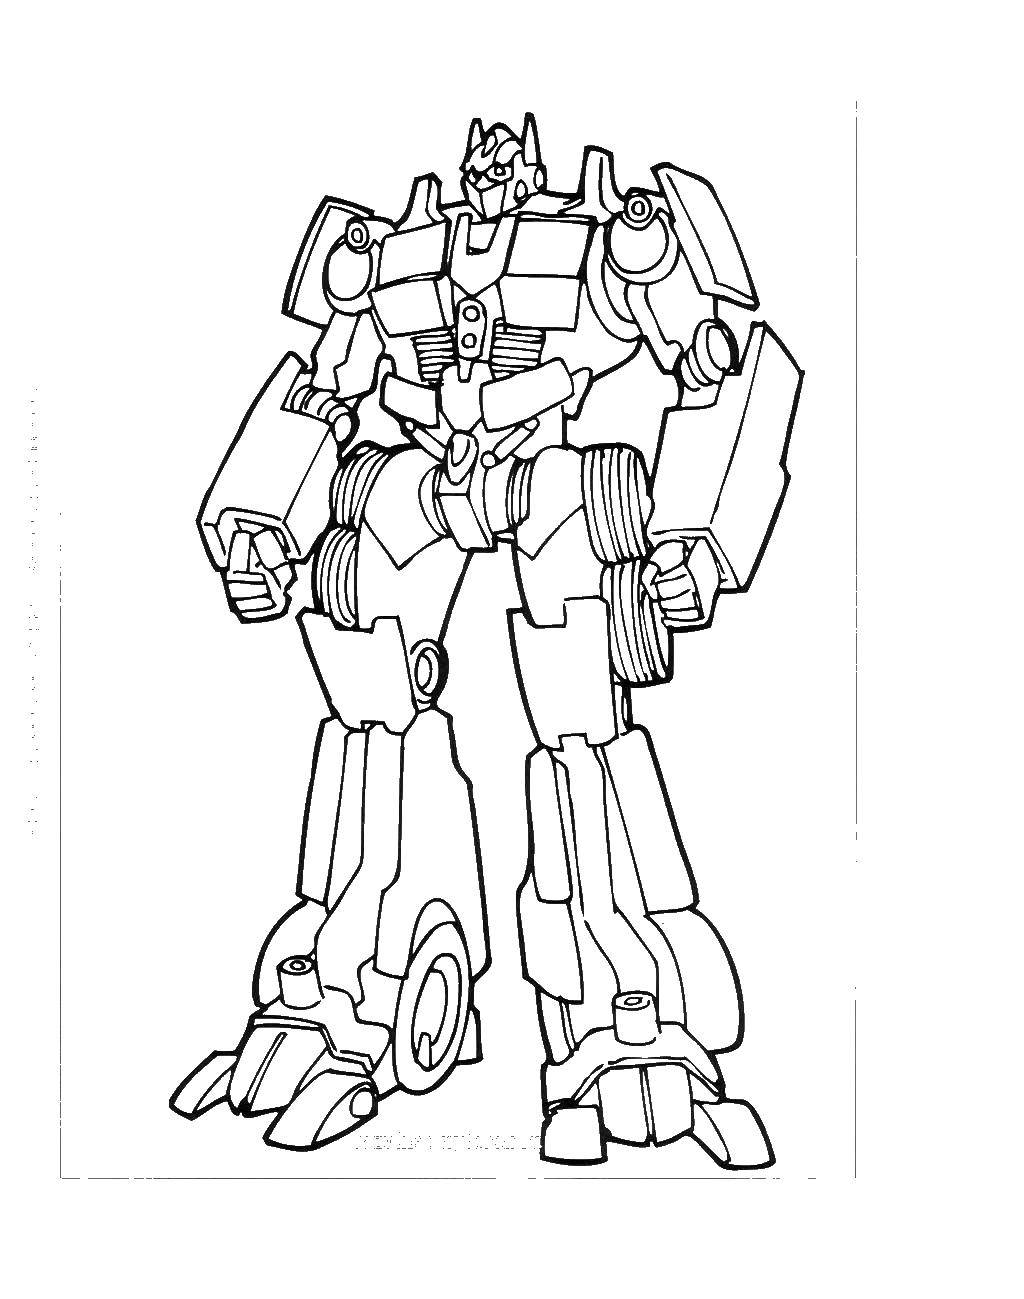 Coloring Transformer. Category transformers. Tags:  robots, transformers, appliances.